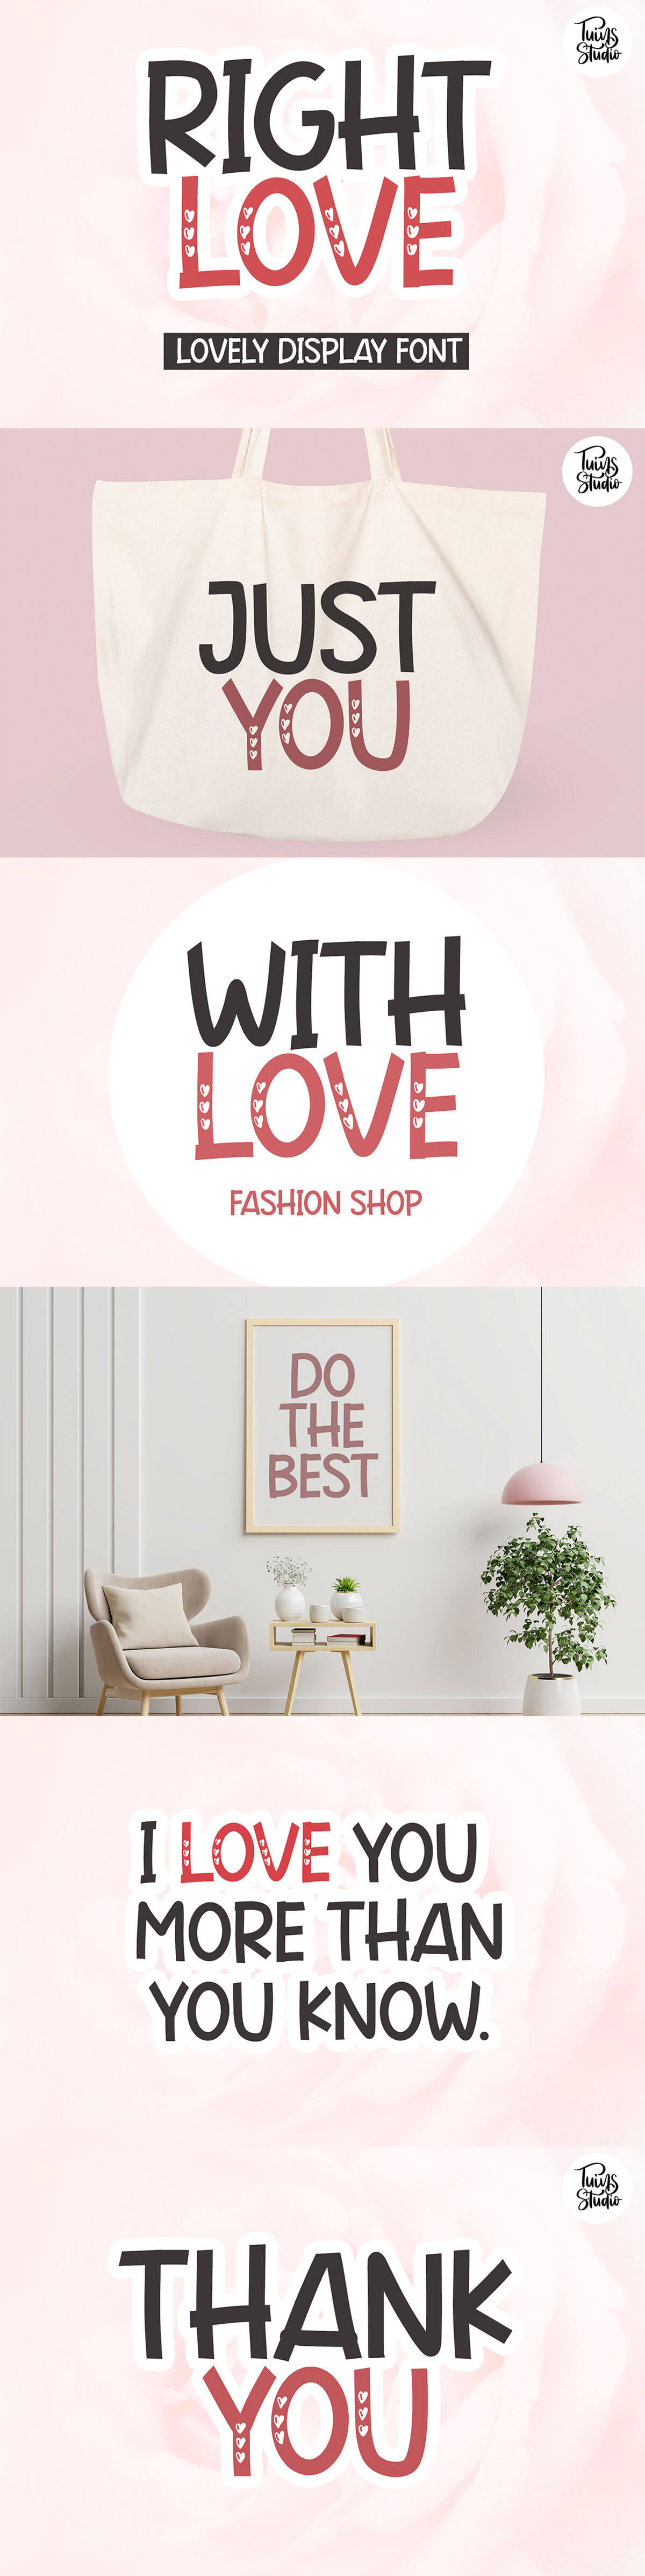 Right Love Display Font